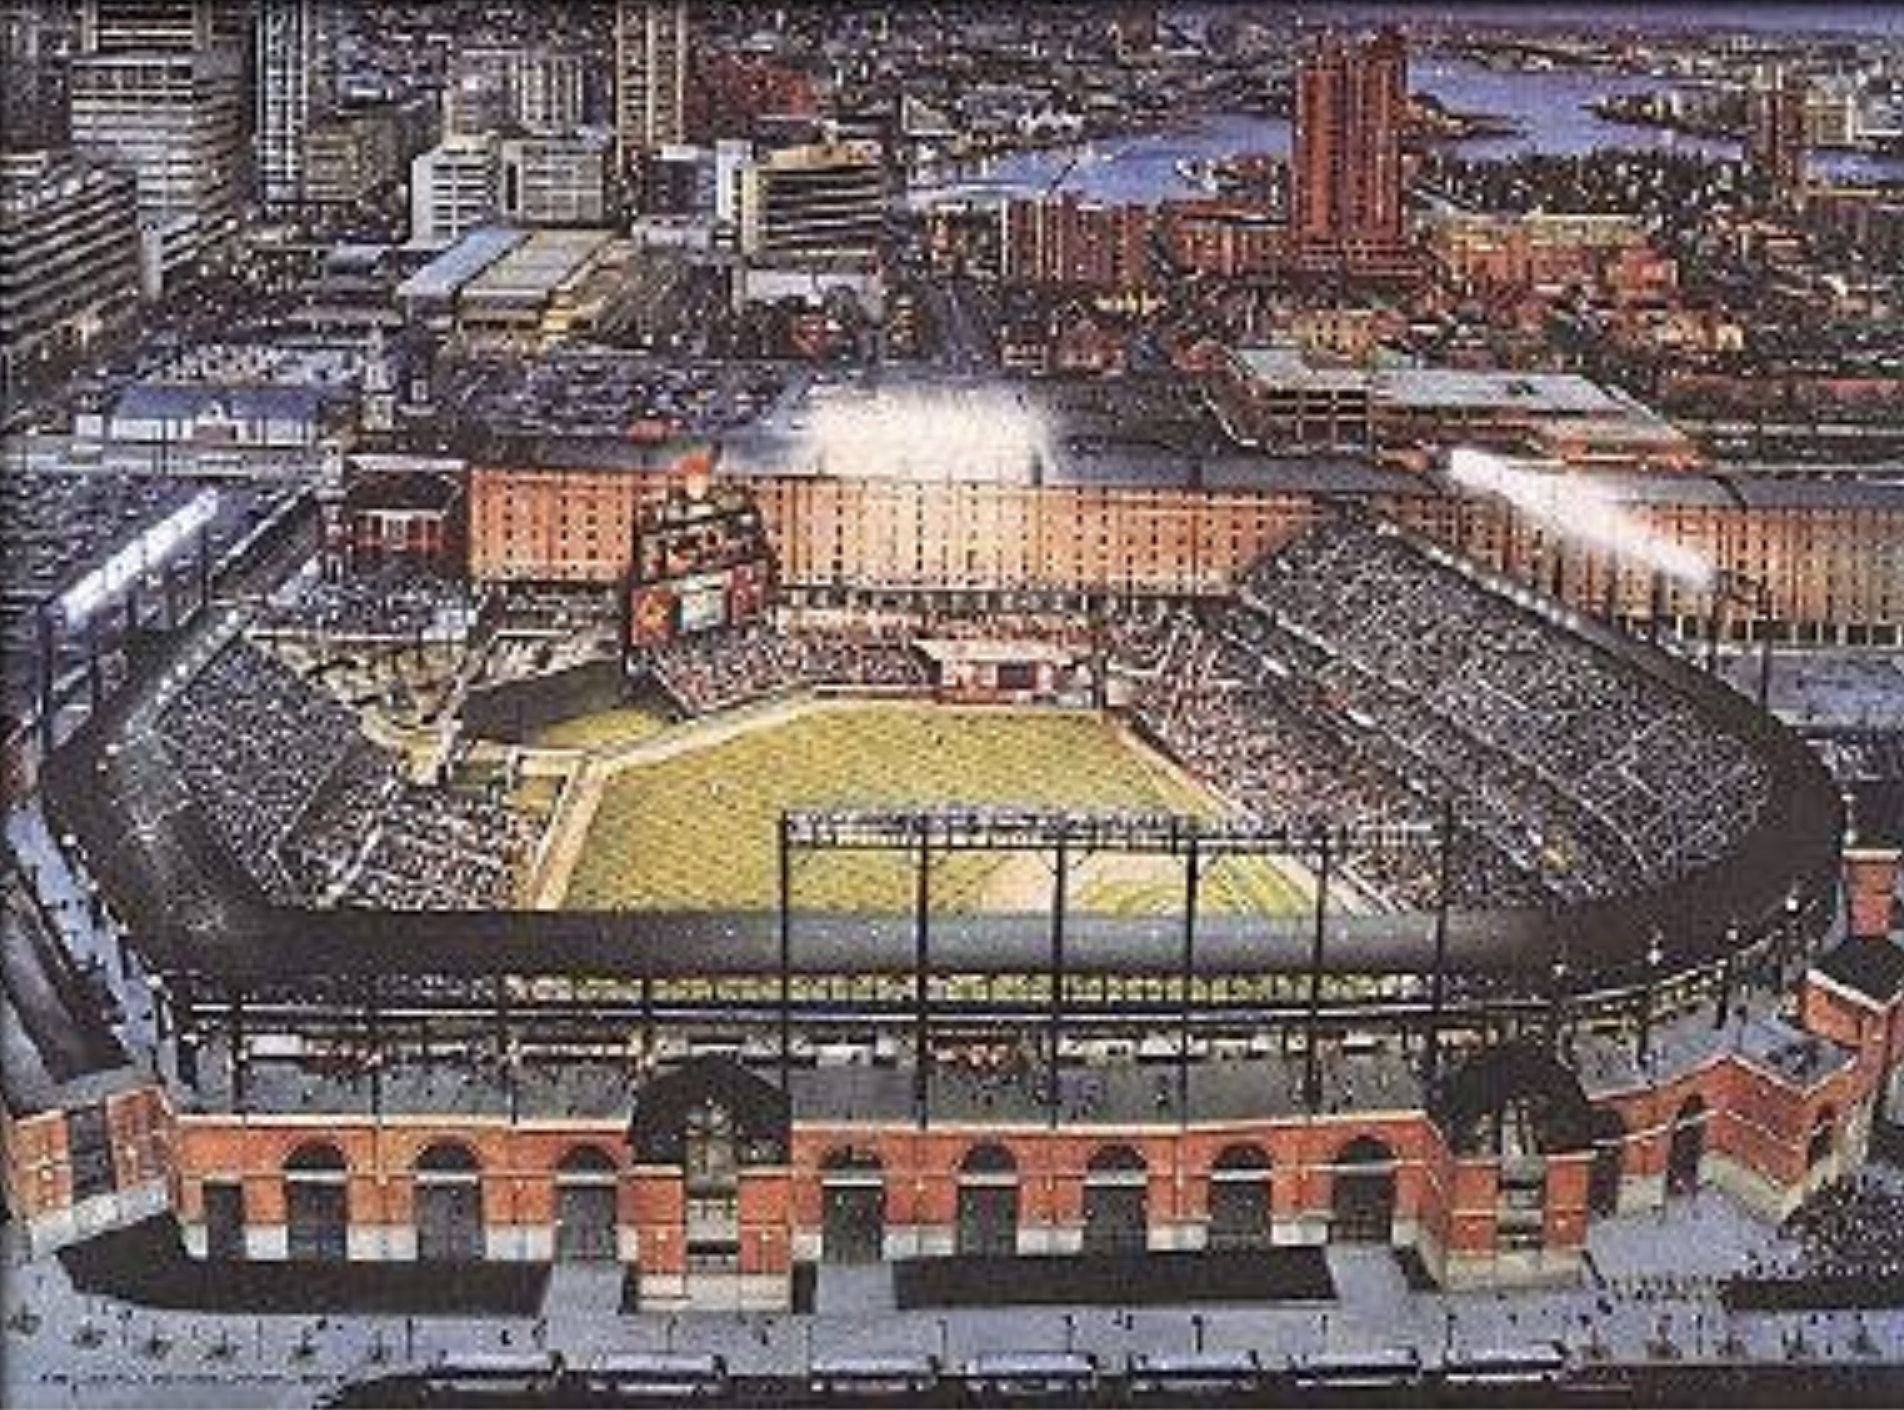 For the love of Camden Yards wasnt it perfect already raskin